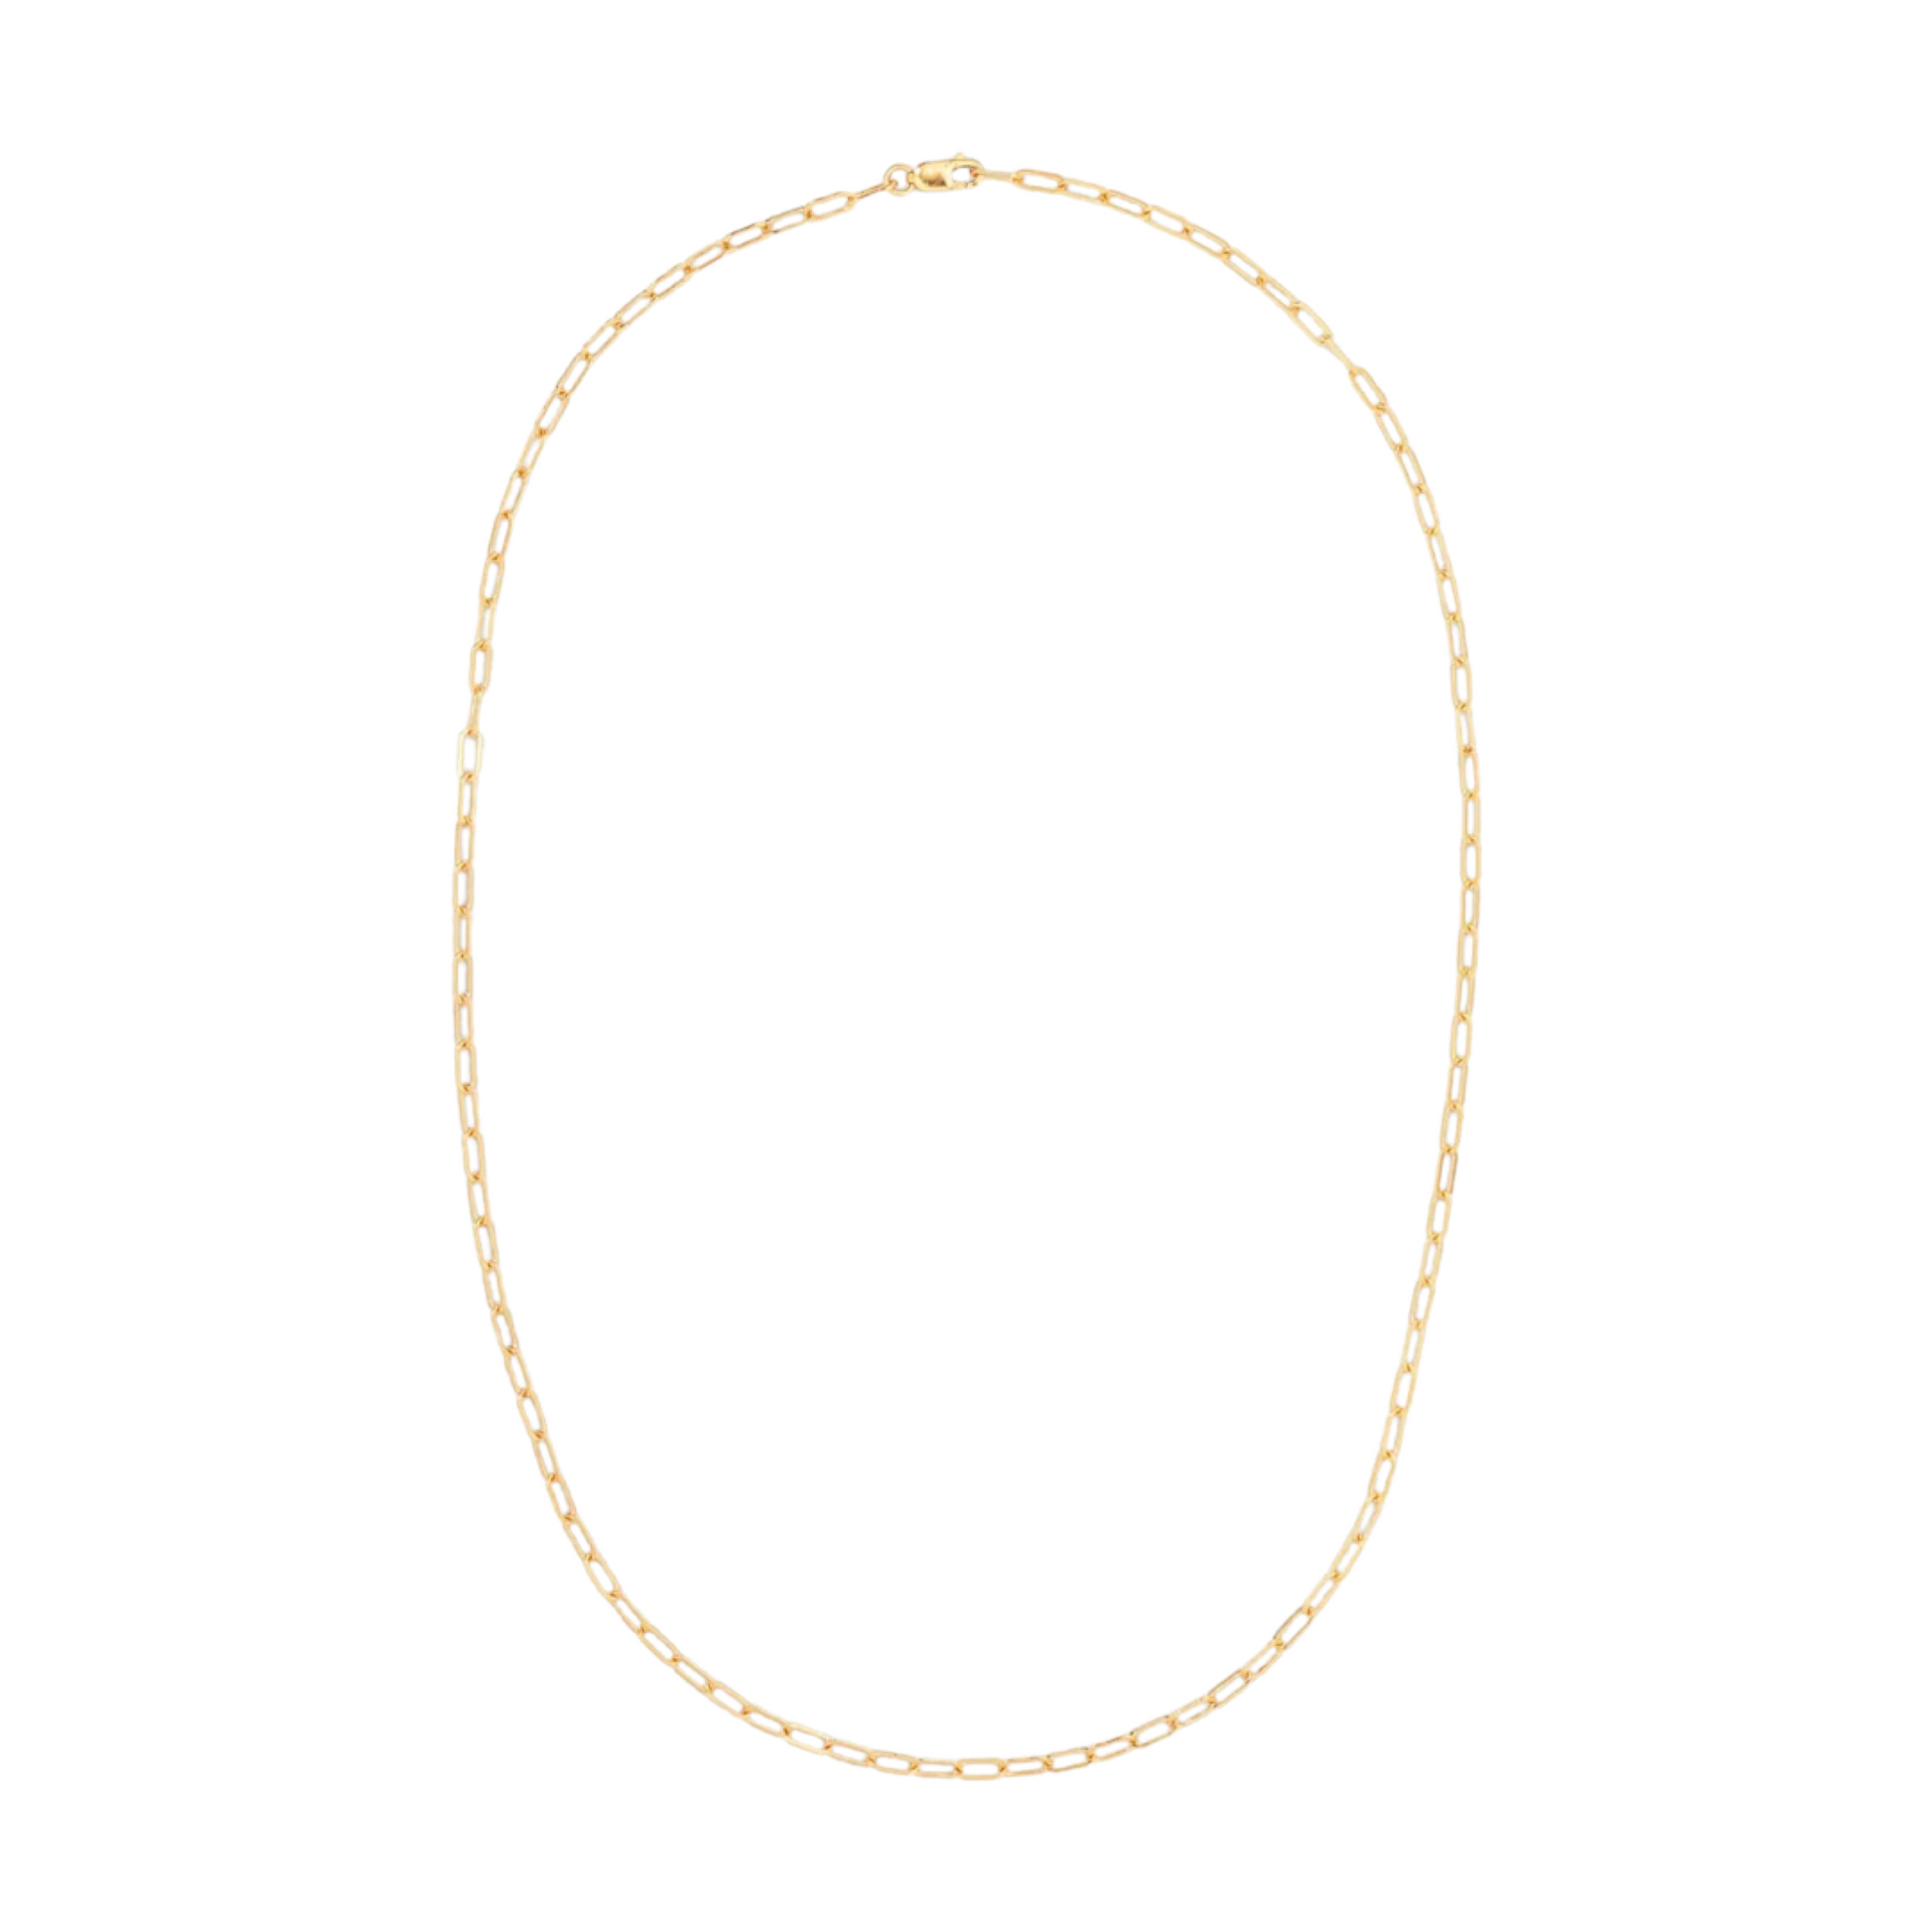 Bisque Small Drawn Chain Necklace Adelaide Harris